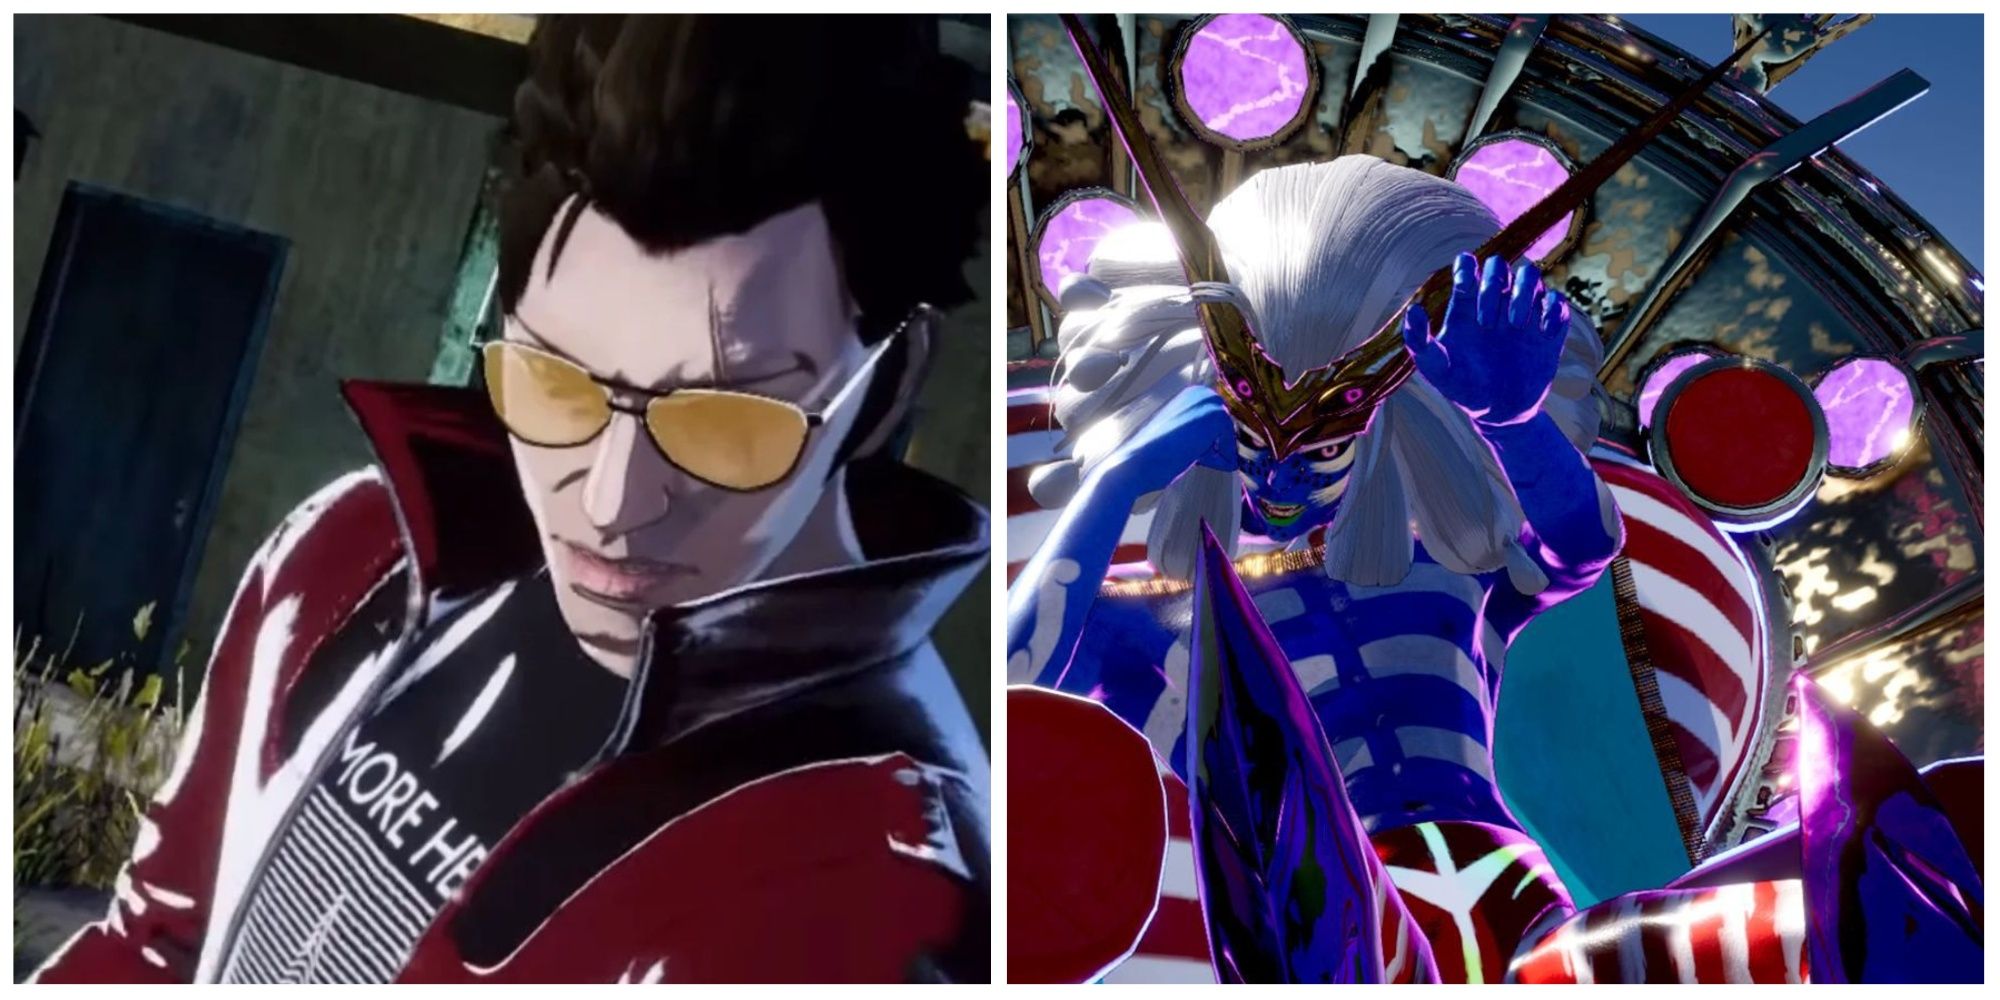 Travis Touchdown and FU from No More Heroes 3.